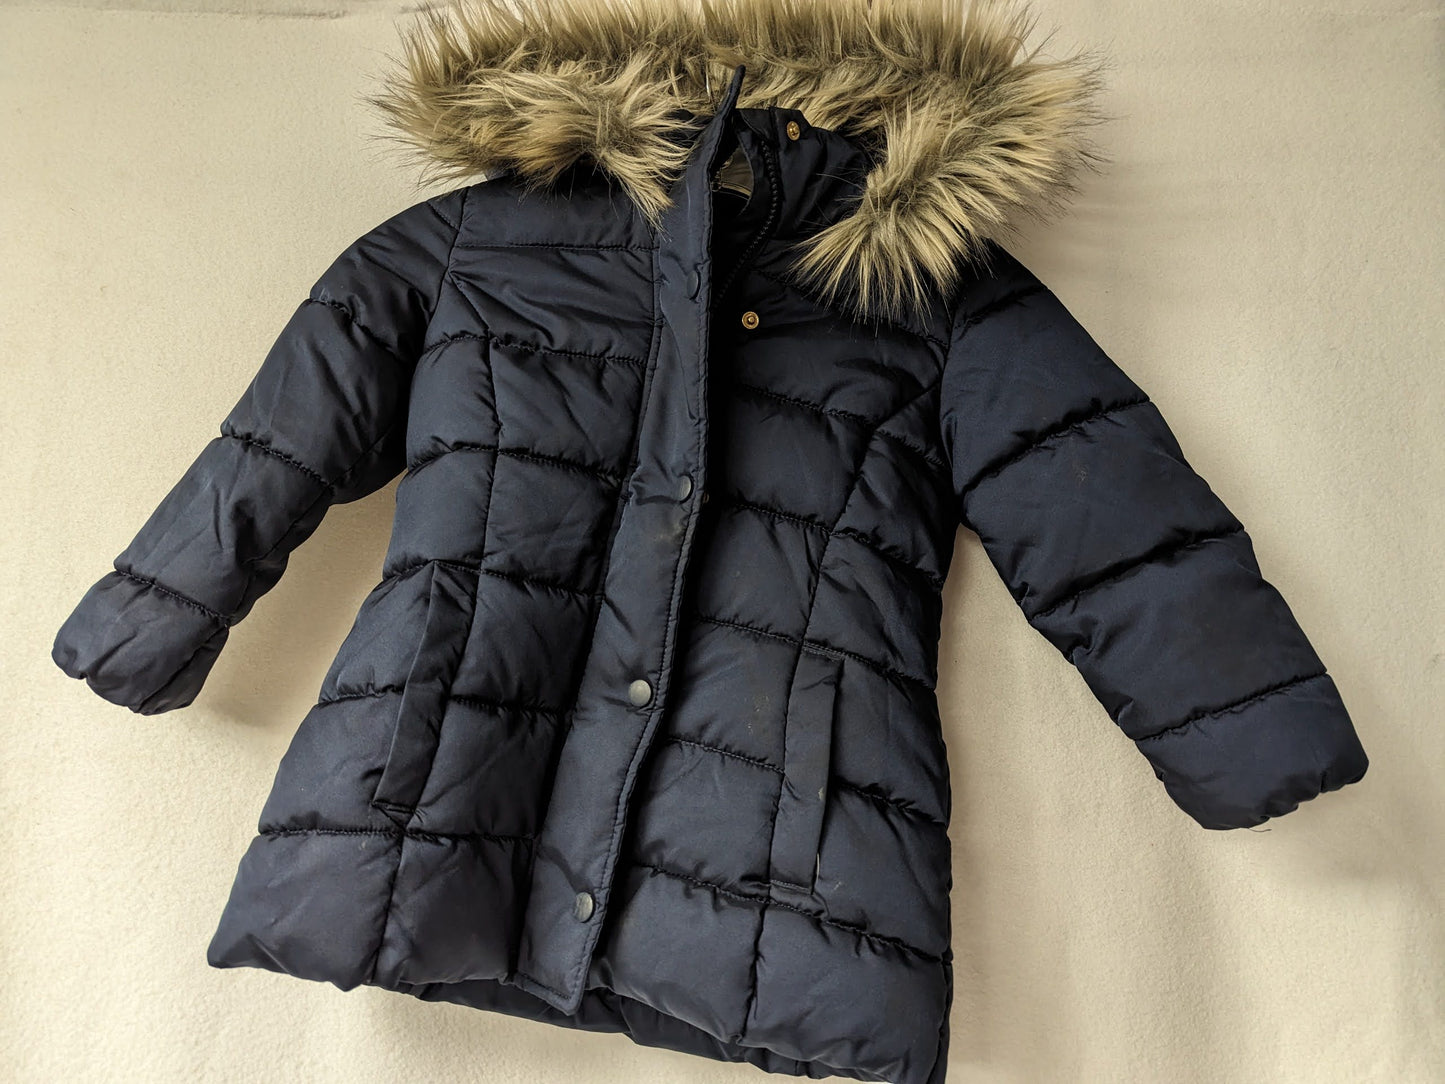 H&M Youth Hooded Puffer Winter Jacket Coat Size Youth Small (K4-5) Color Blue Condition Used